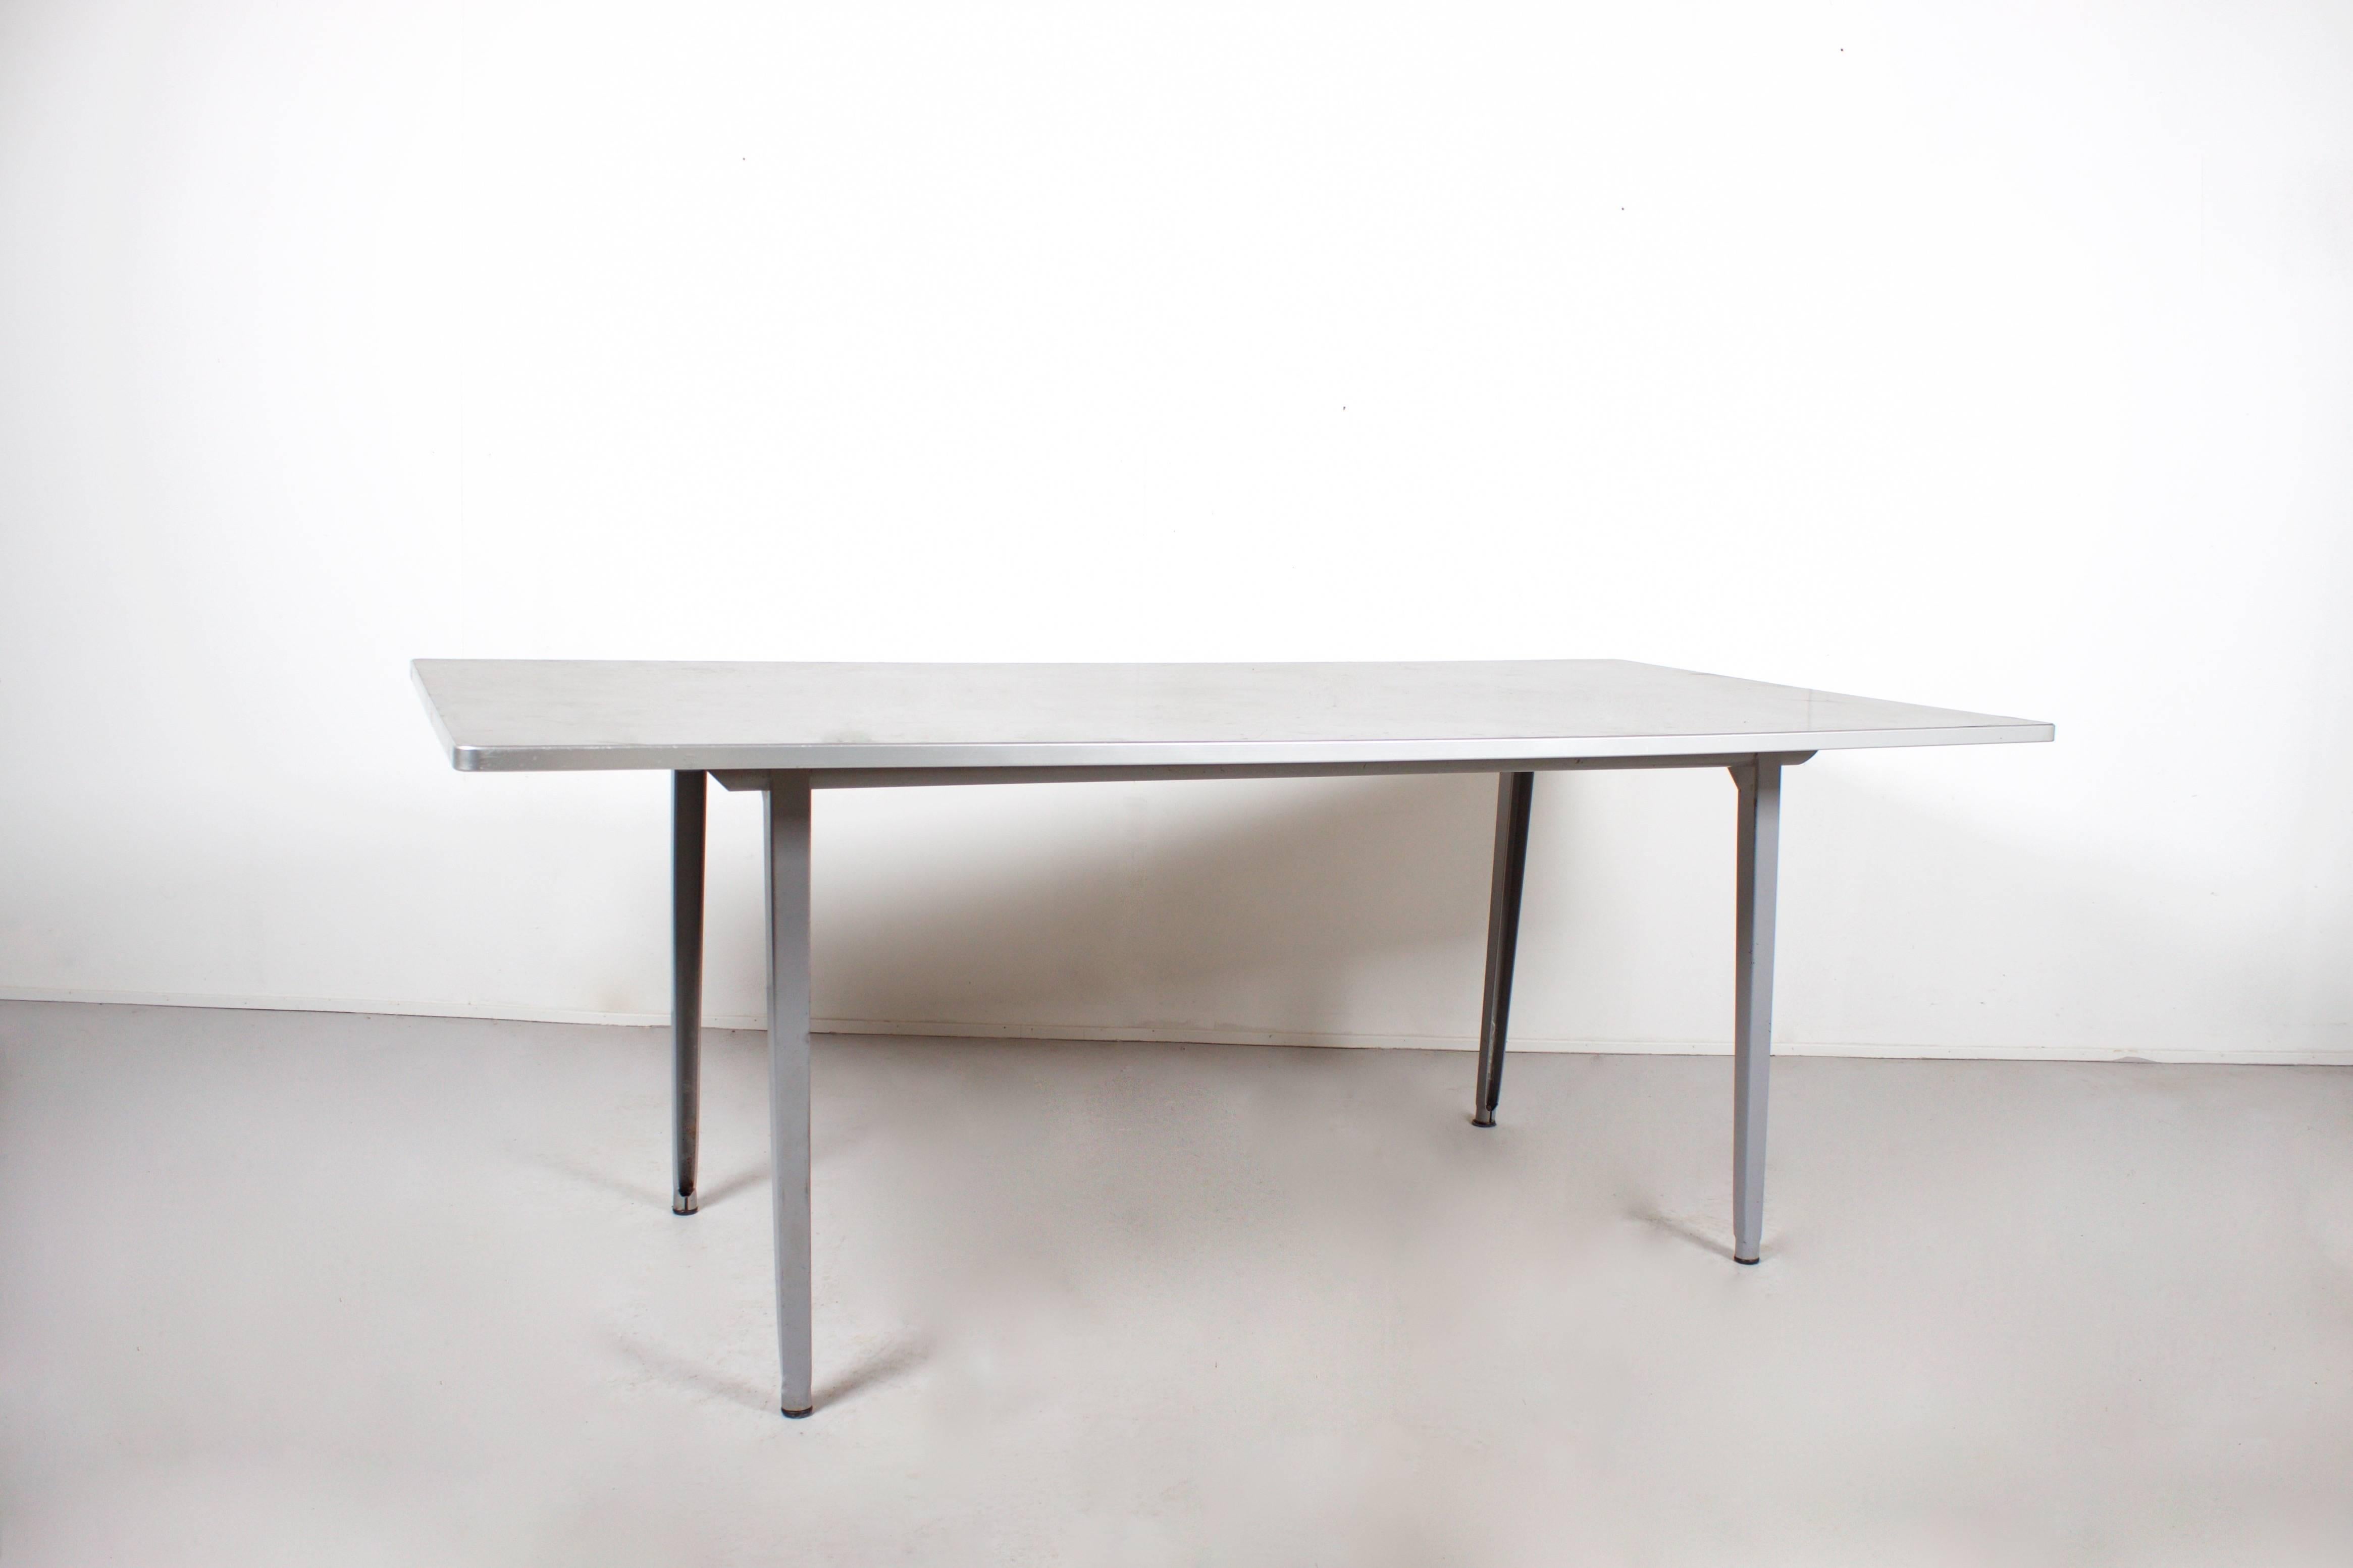 Hard to find large version of the Reform table by Friso Kramer.

Measurements: 200 x 100 cm. (LxW)

Manufactured by Ahrend de Cirkel during the 1955’s

It has a grey lacquered metal frame.

The top is laminated with a dark grey linoleum and has a